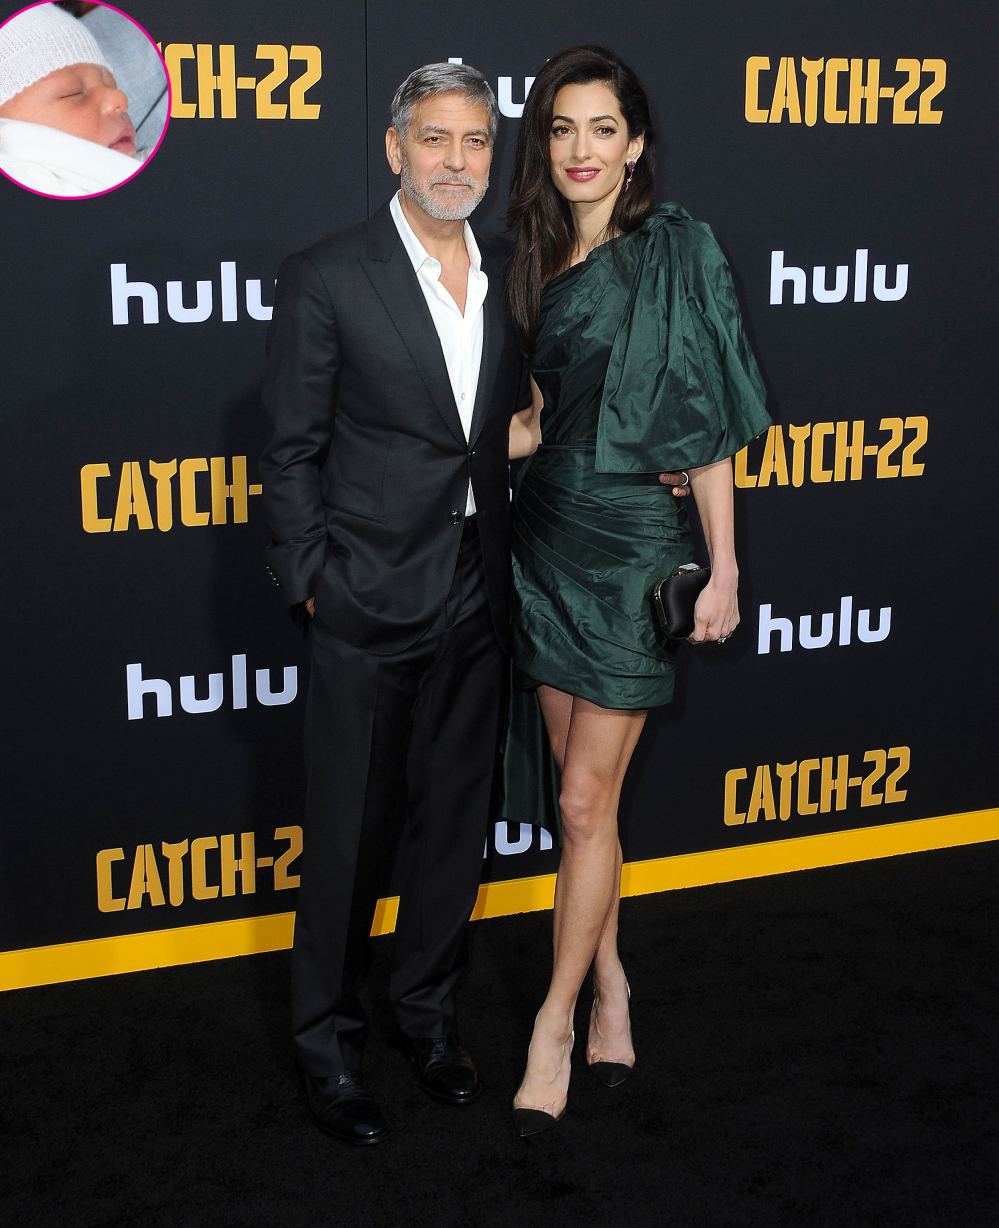 George Clooney and Amal Clooney and Archie